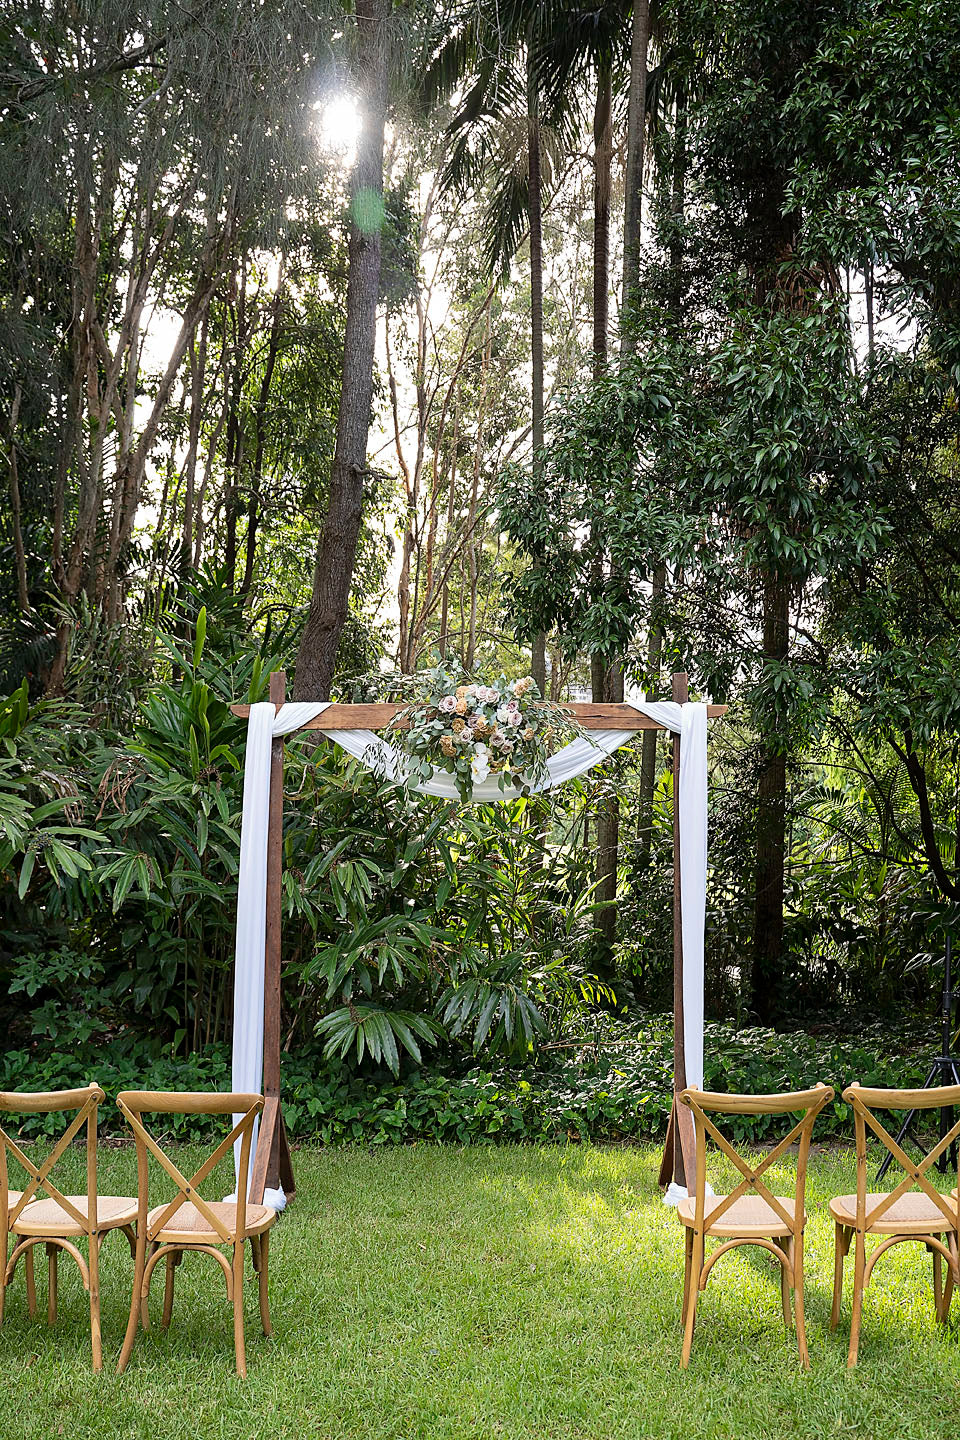 Ceremony styling - Wooden